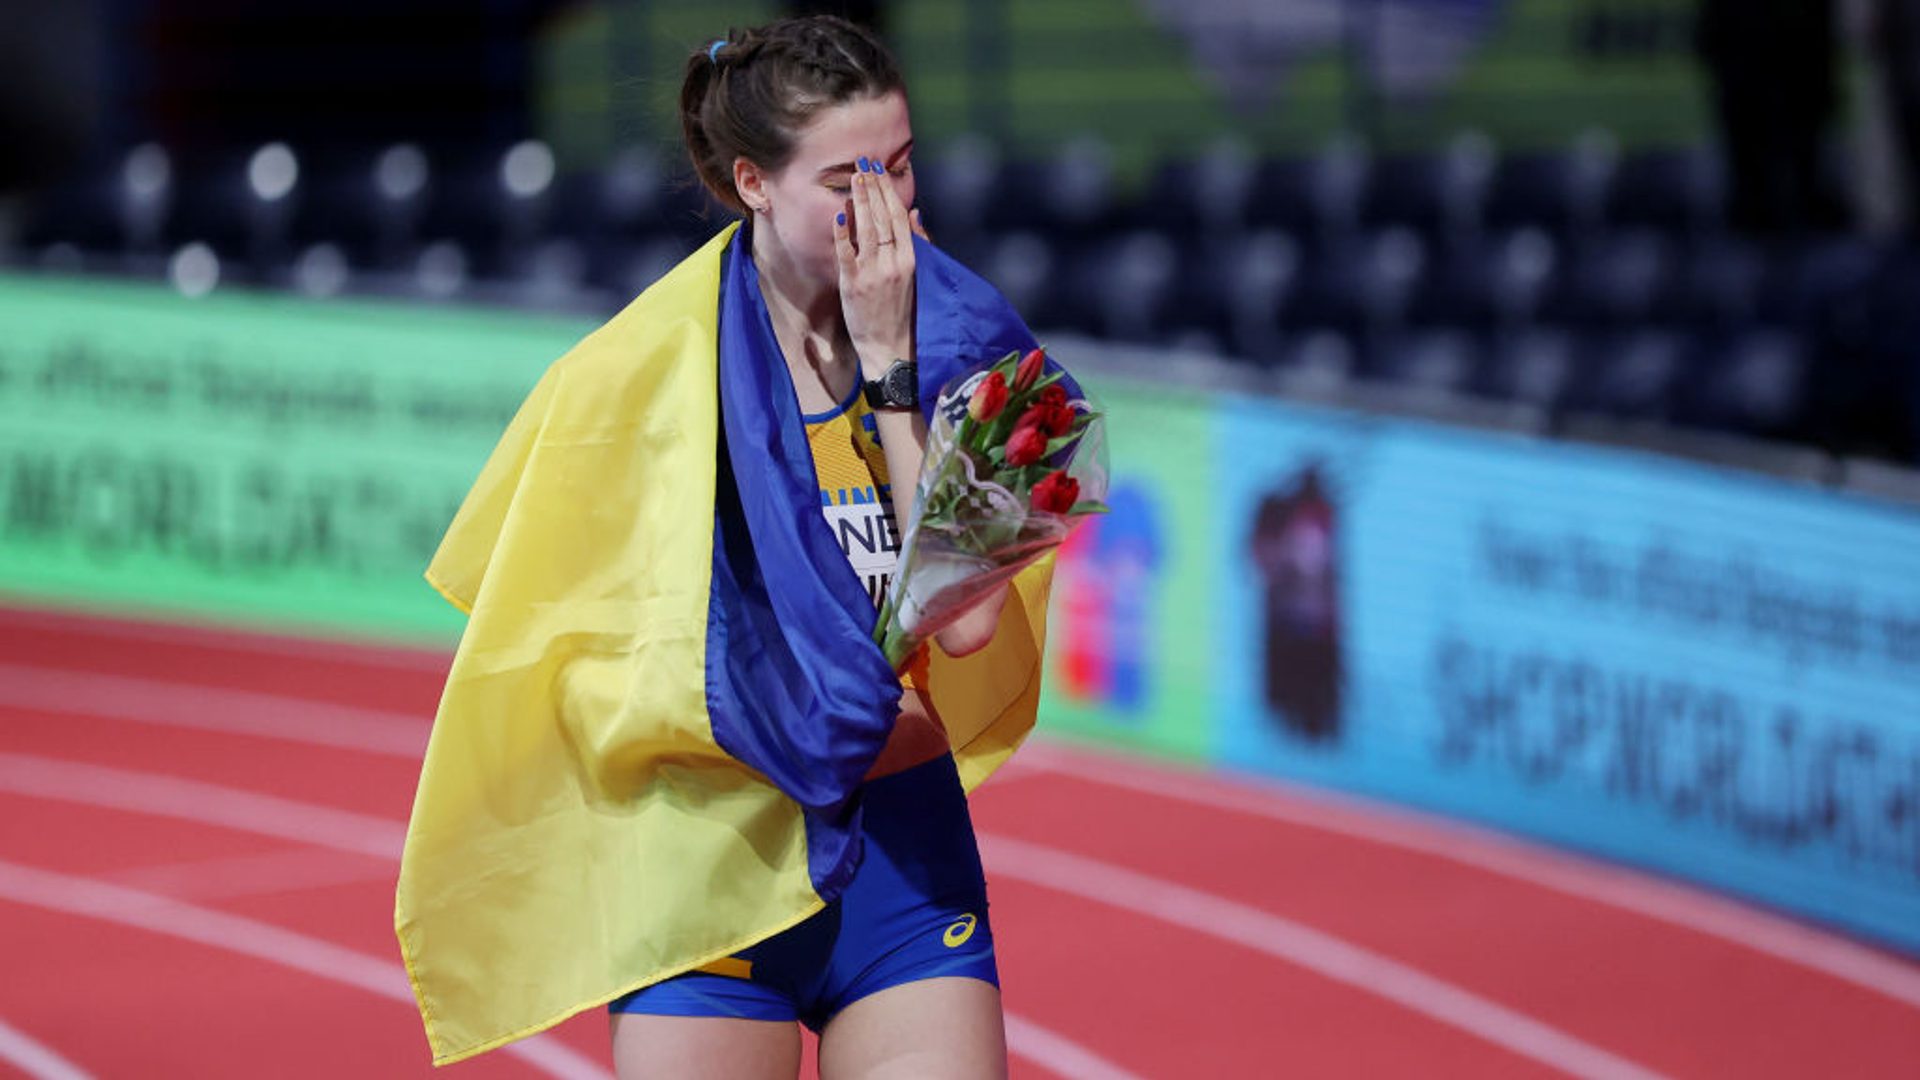 An emotional Yaroslava Mahuchikh after winning the Indoor World Championship 2022, just a few weeks after Russia's invasion of Ukraine